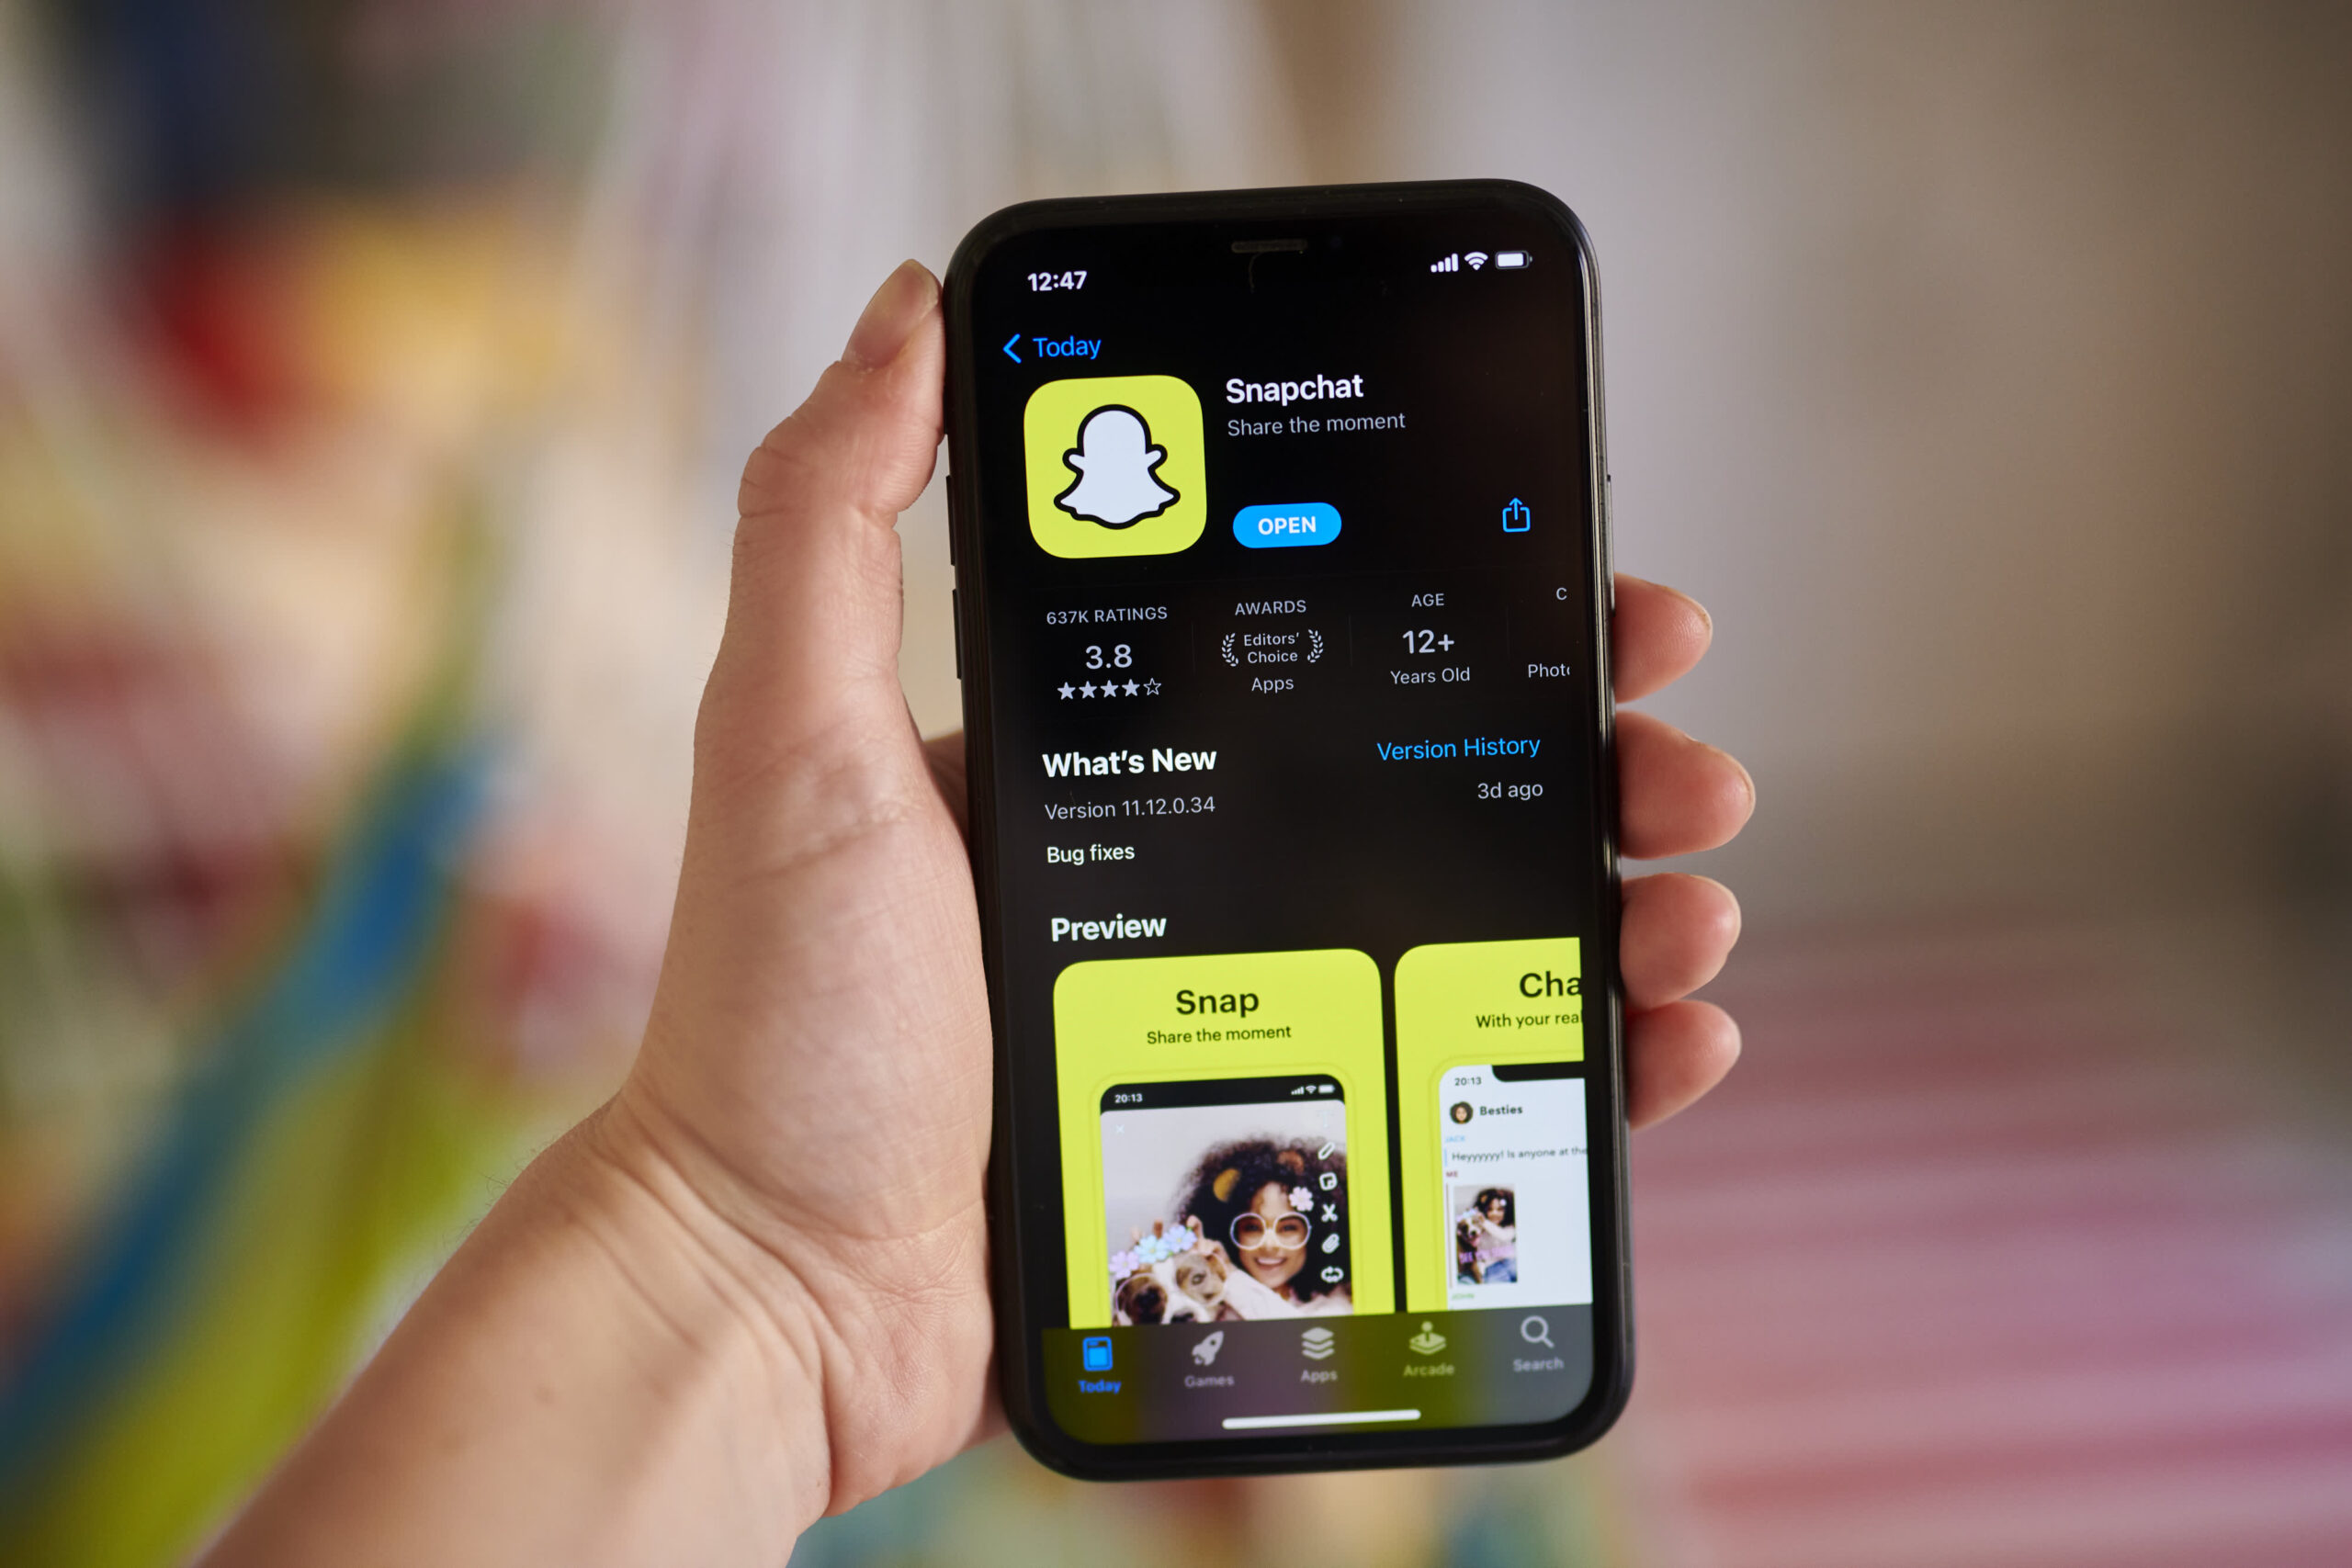 How To Change Your Username On Snapchat